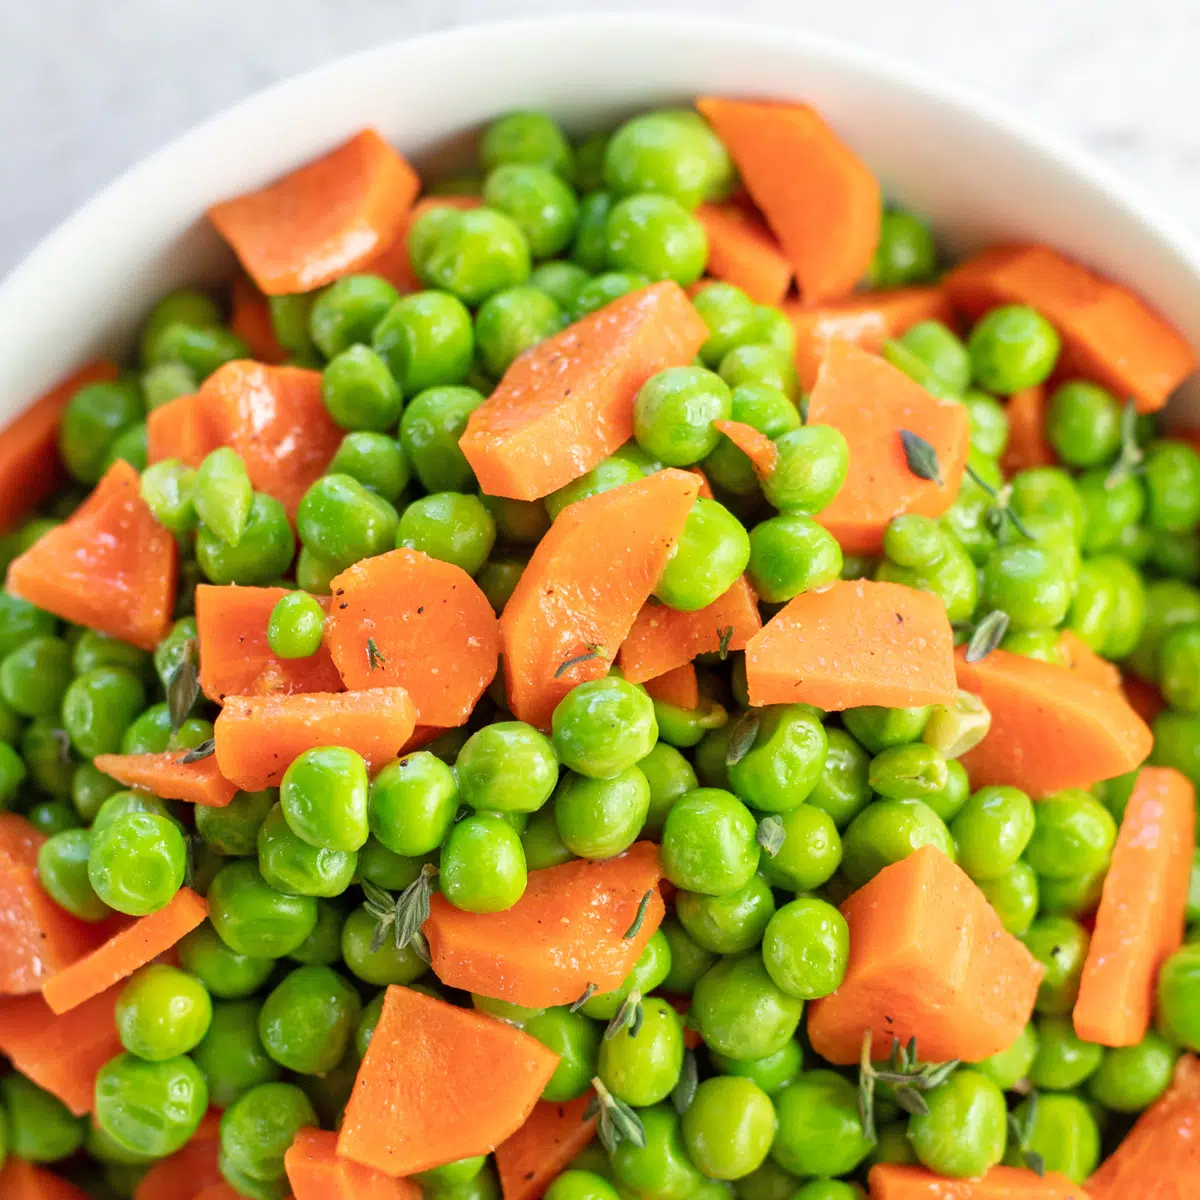 Square image of a white bowl filled with peas and carrots.